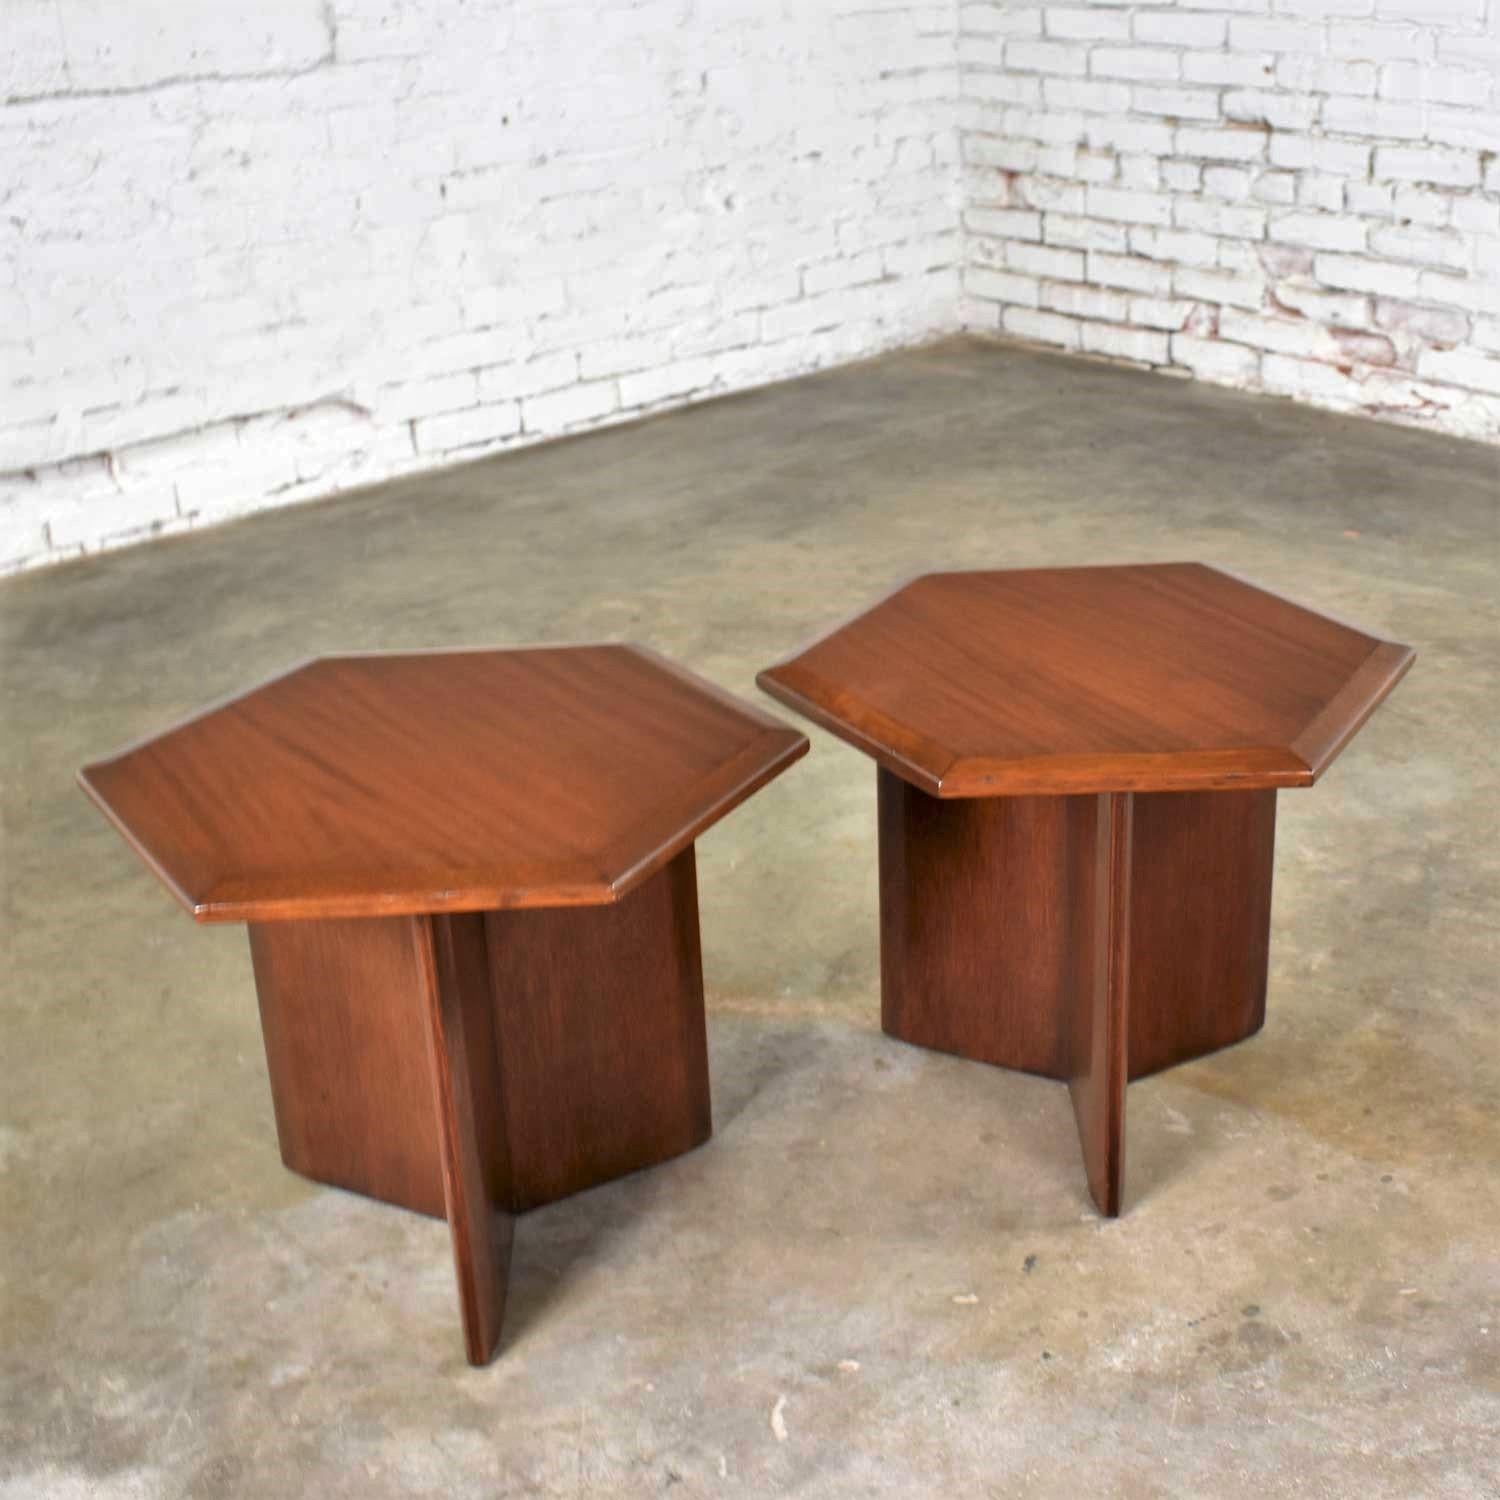 20th Century Pair Walnut Stained Hexagon Side Tables Style of Frank Lloyd Wright for Henredon